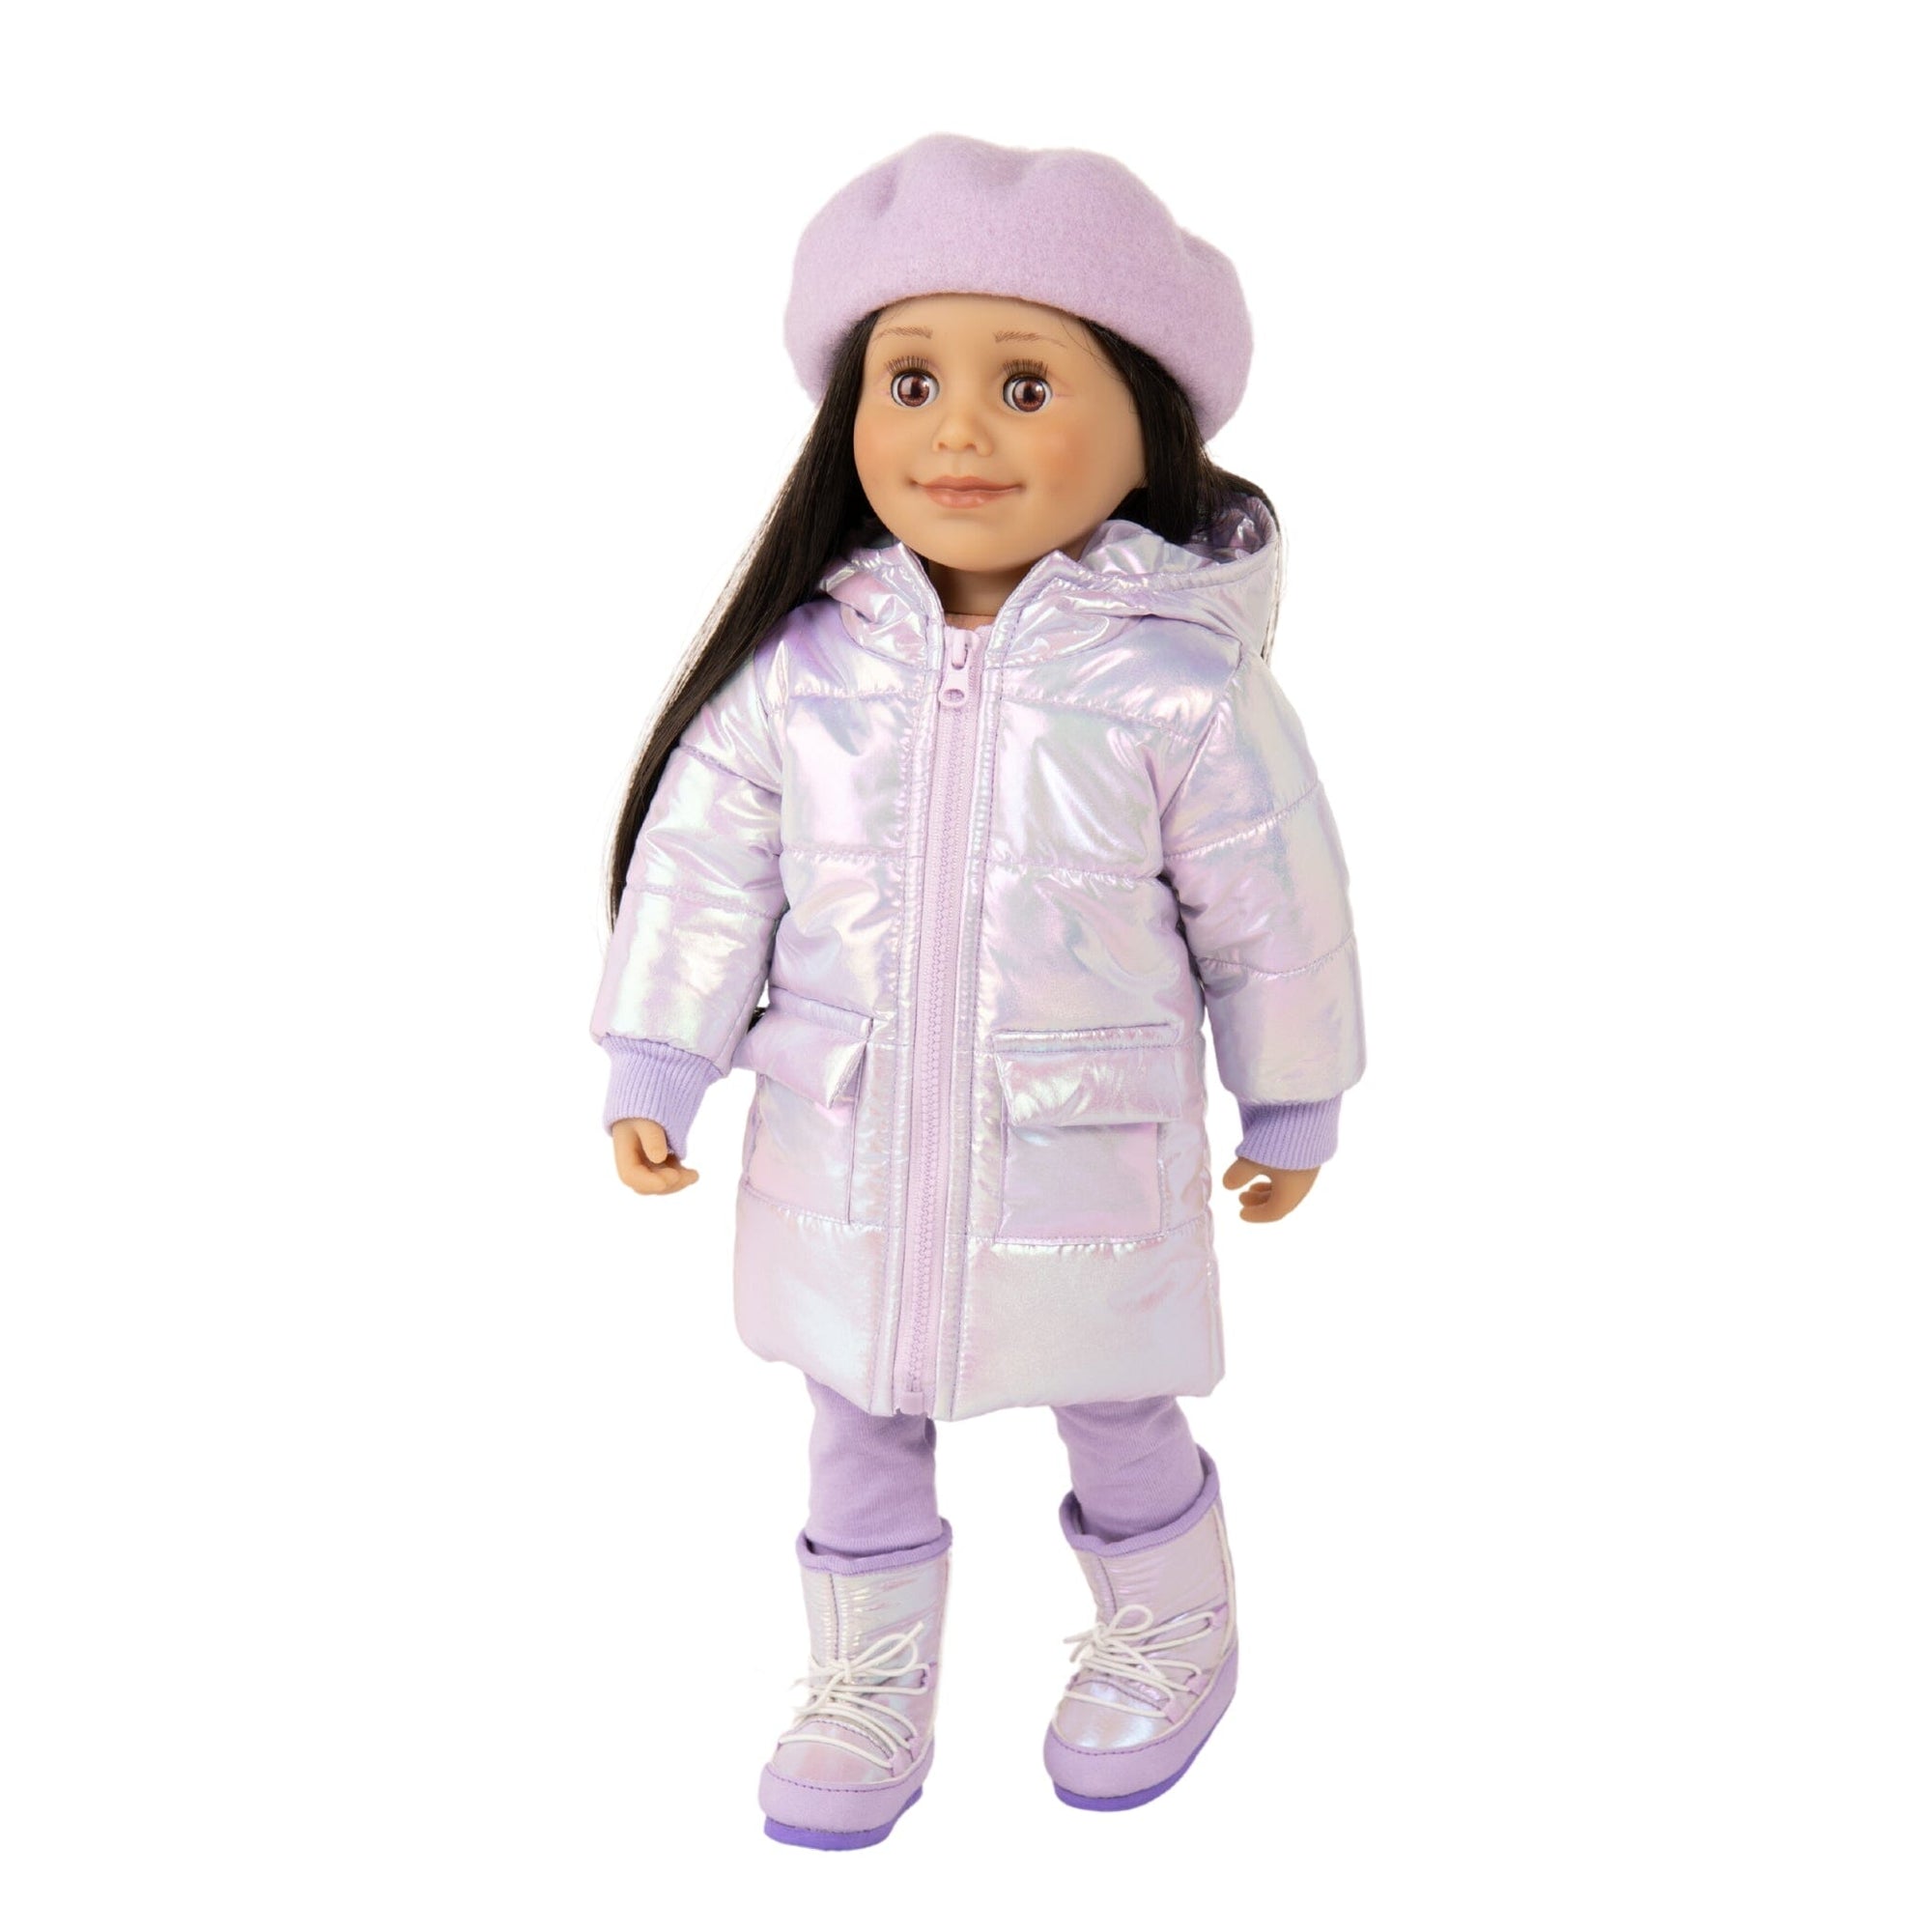 KA53-Cosmic Coat Set-Maplelea 18" Alexi doll with shiny pale lavender puffy coat hat and moon boots